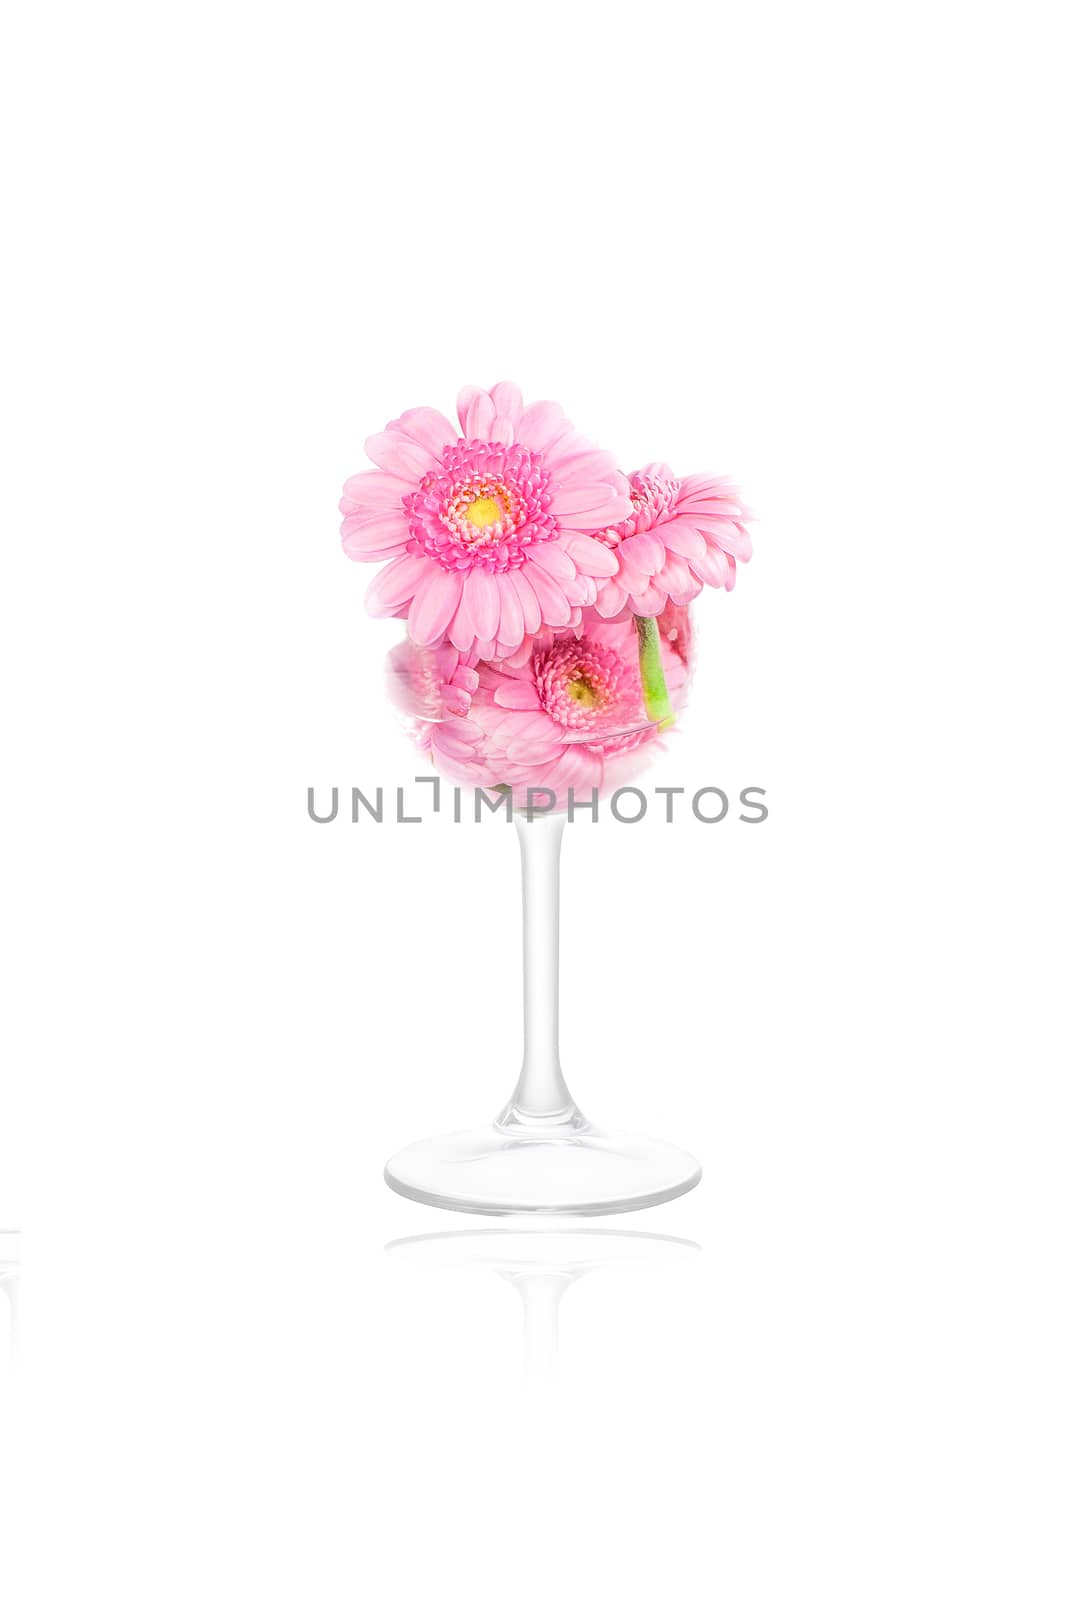 Marguerite flowers in a wine glass on white background